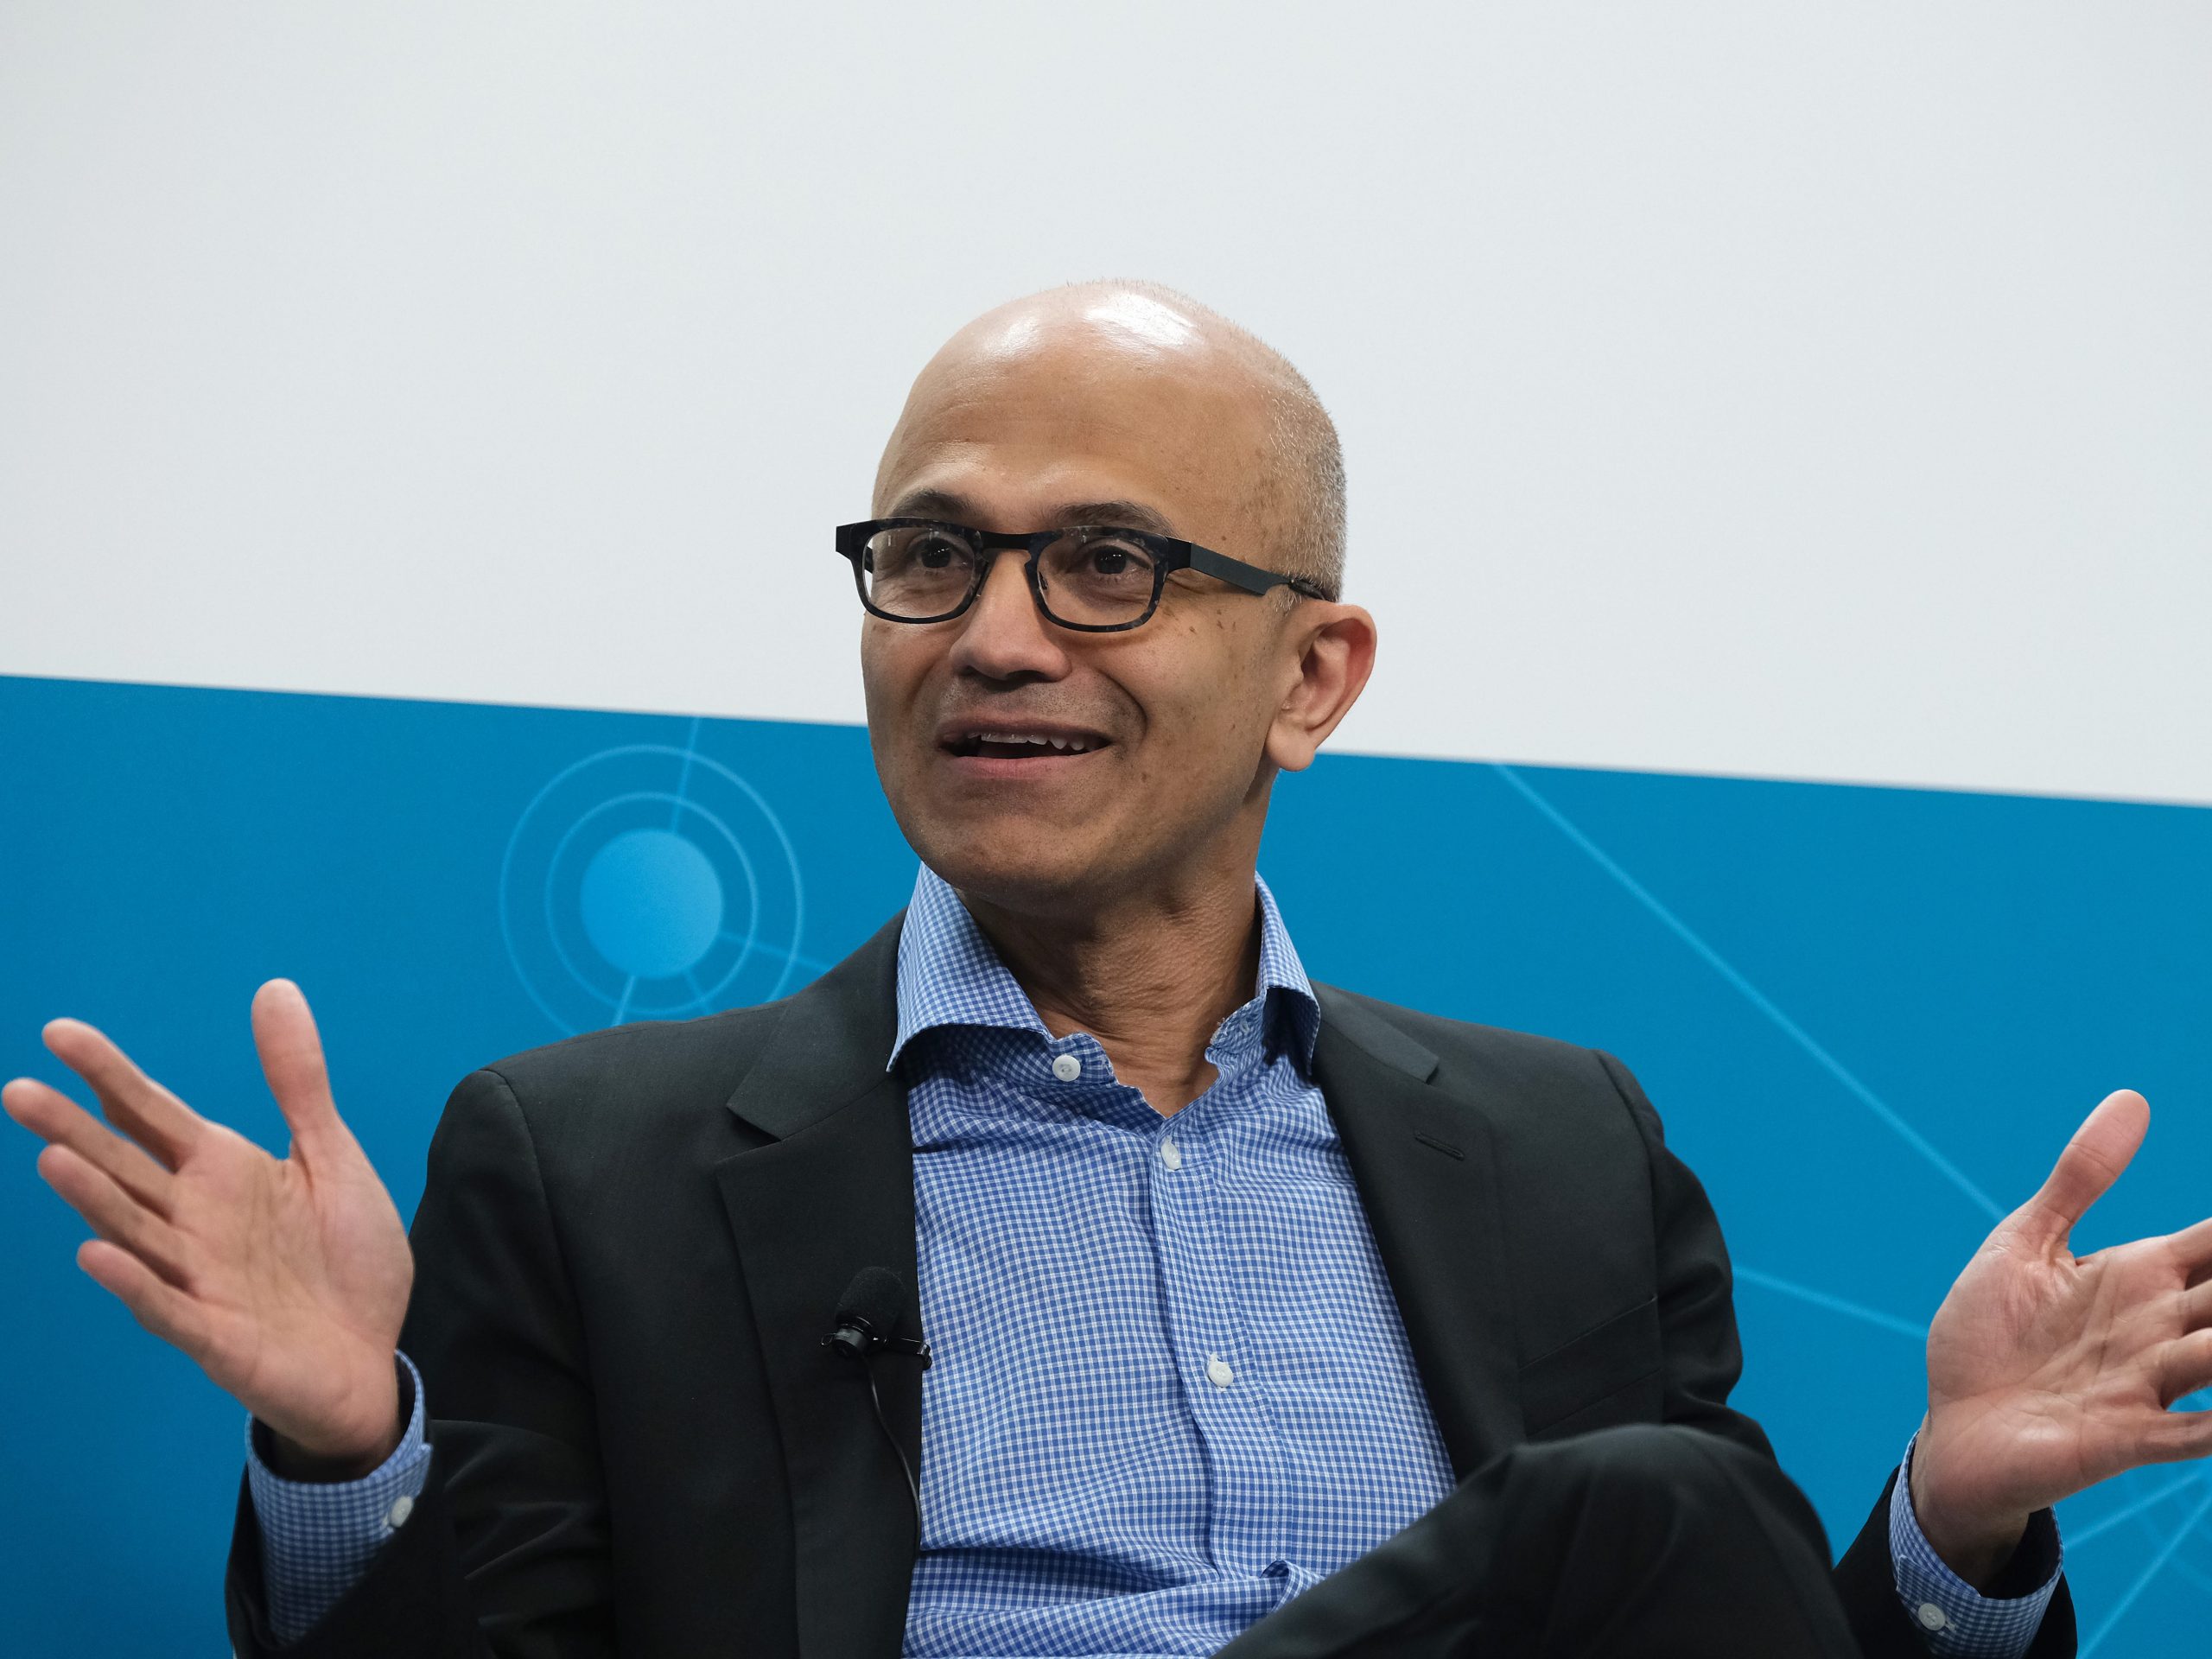 Microsoft CEO Satya Nadella, seated with open hands.